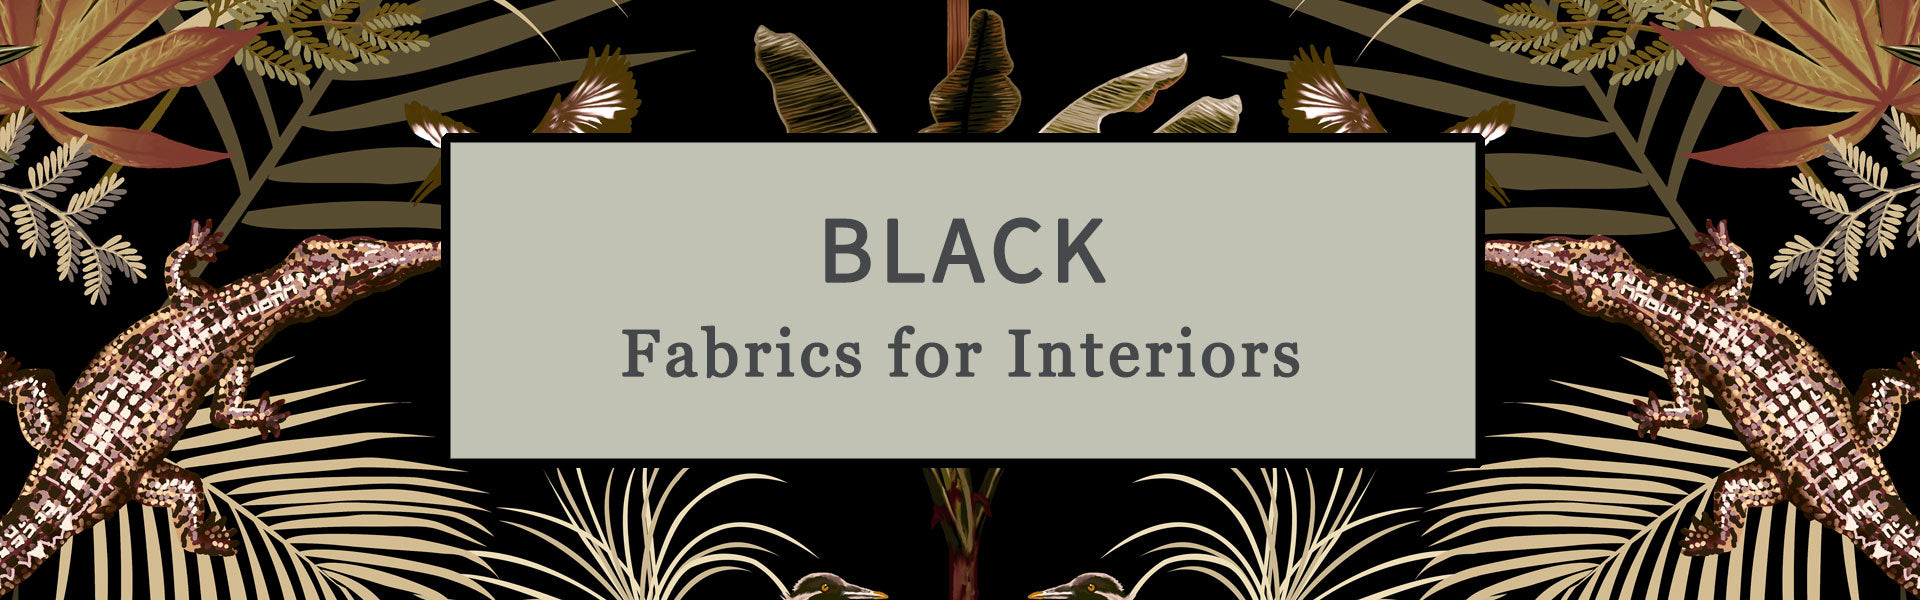 Black Fabric for Interiors, Upholstery, Curtains & Soft Furnishings by Designer, Becca Who